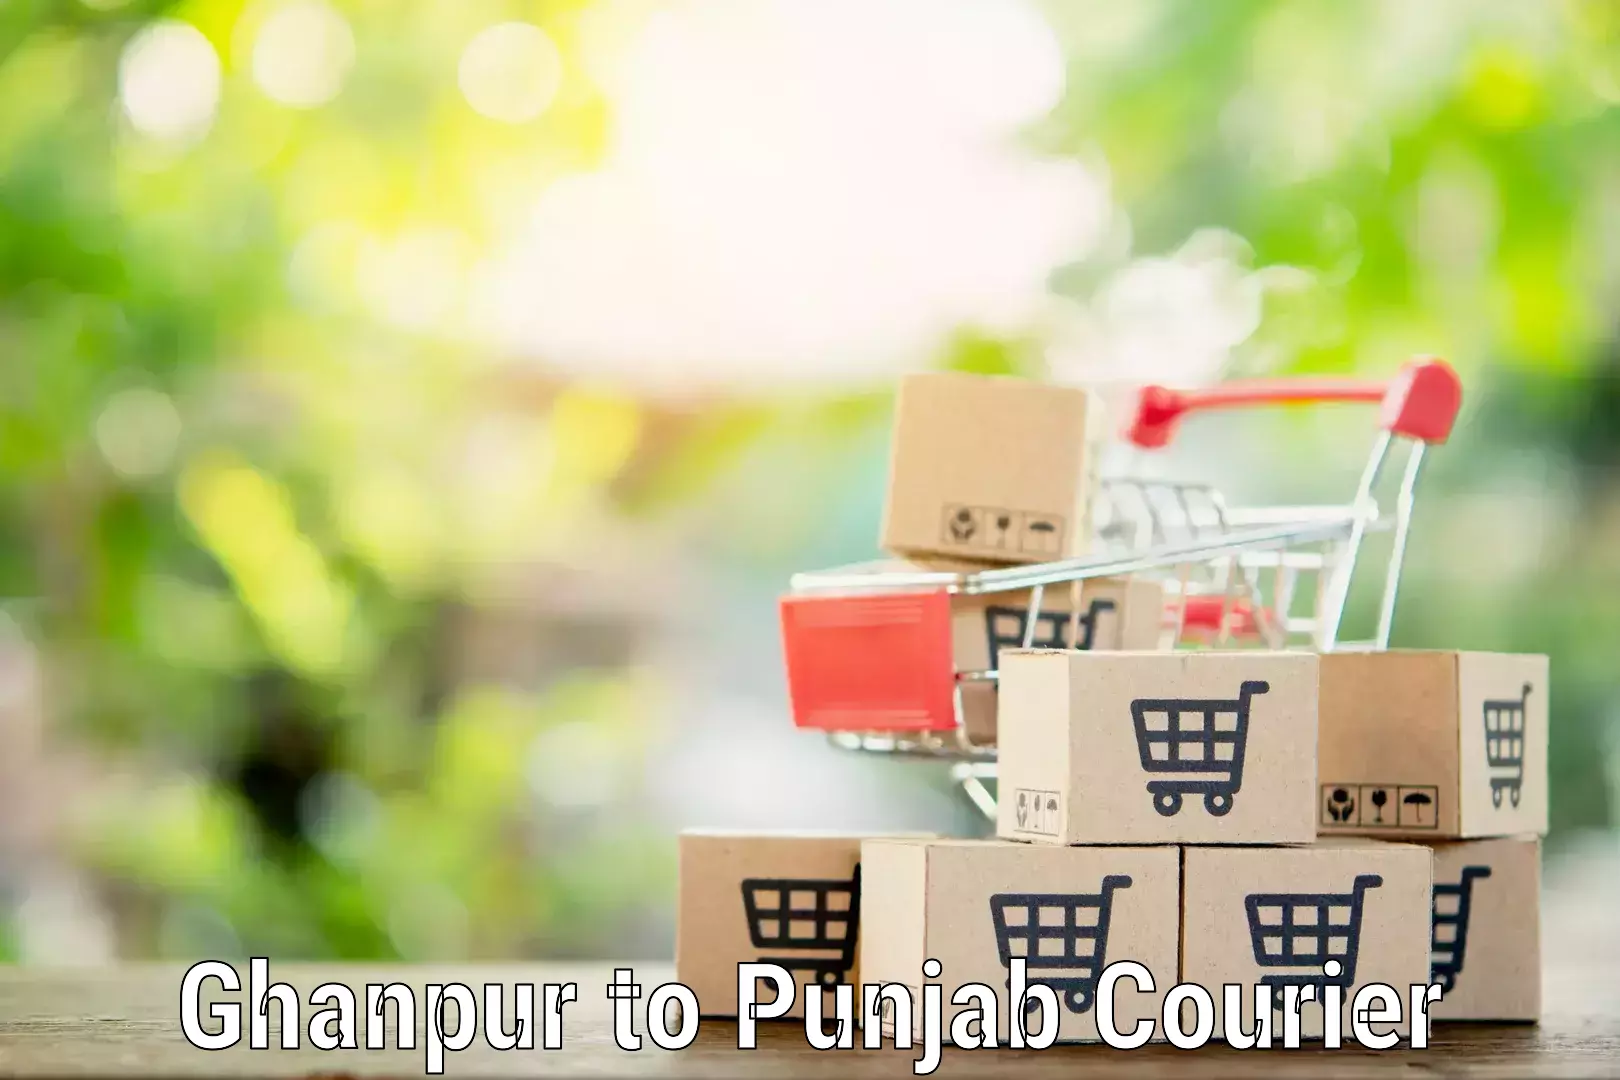 Efficient moving company Ghanpur to Patiala